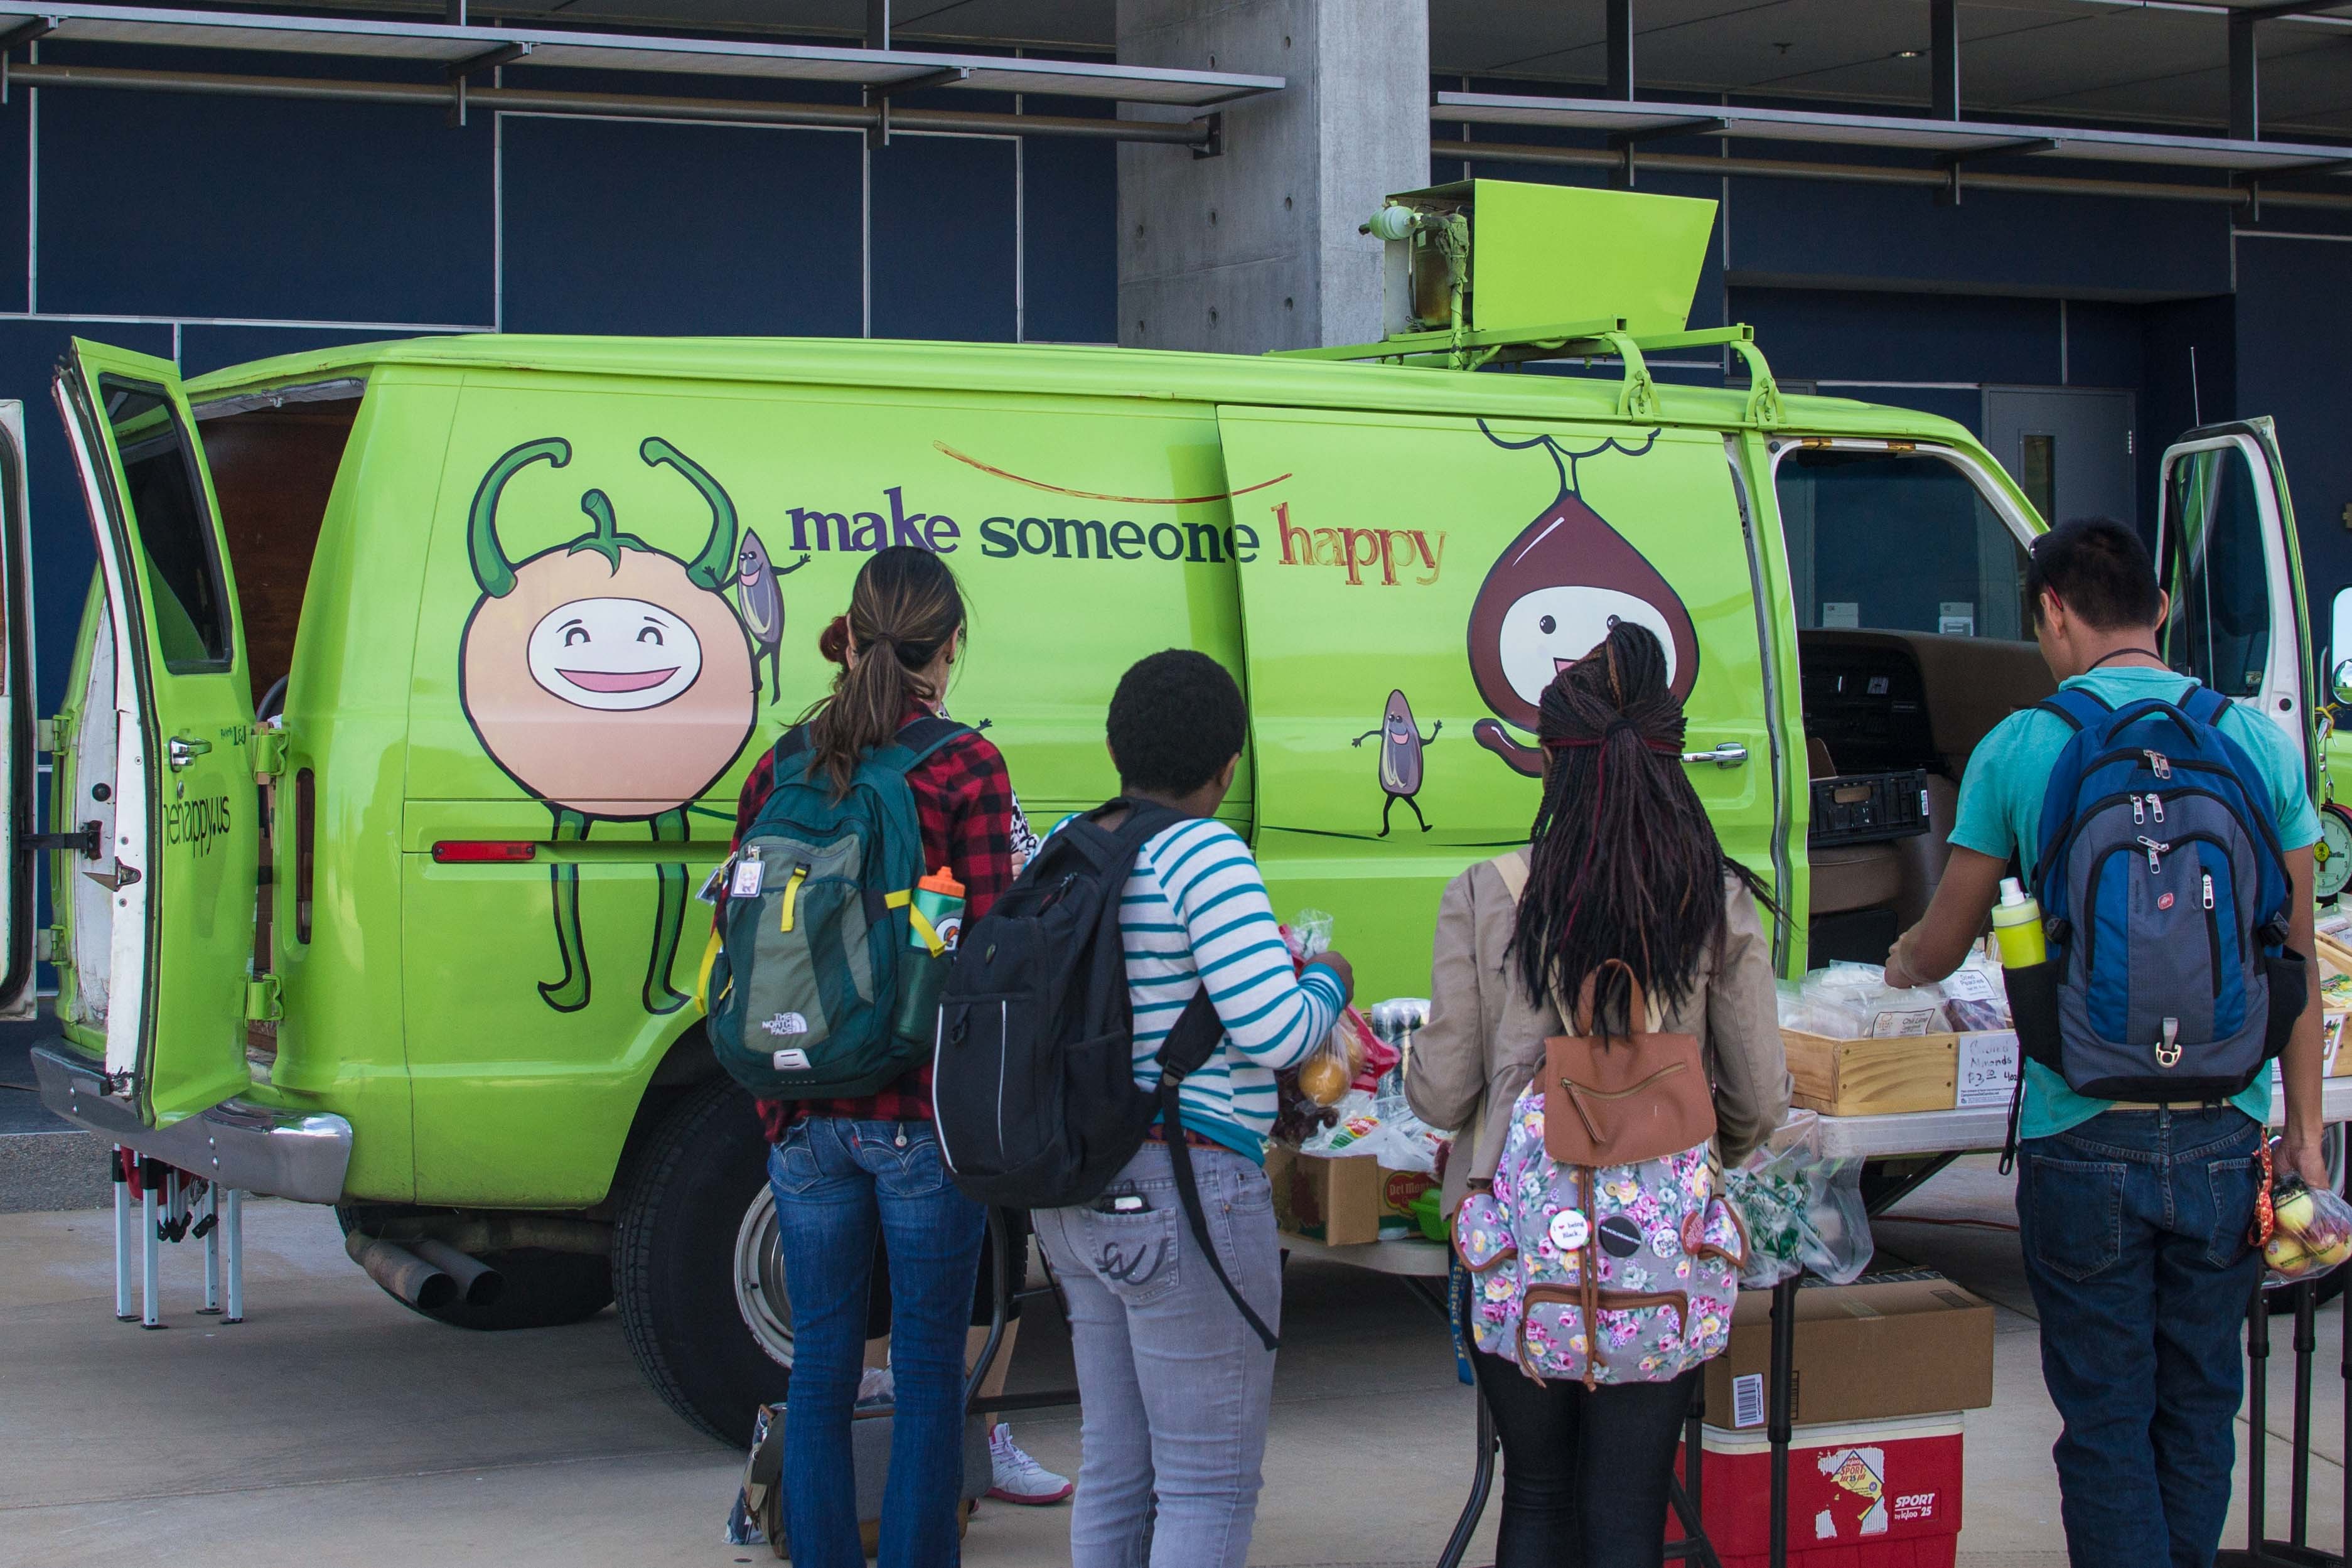 Students stand in front of the food van.